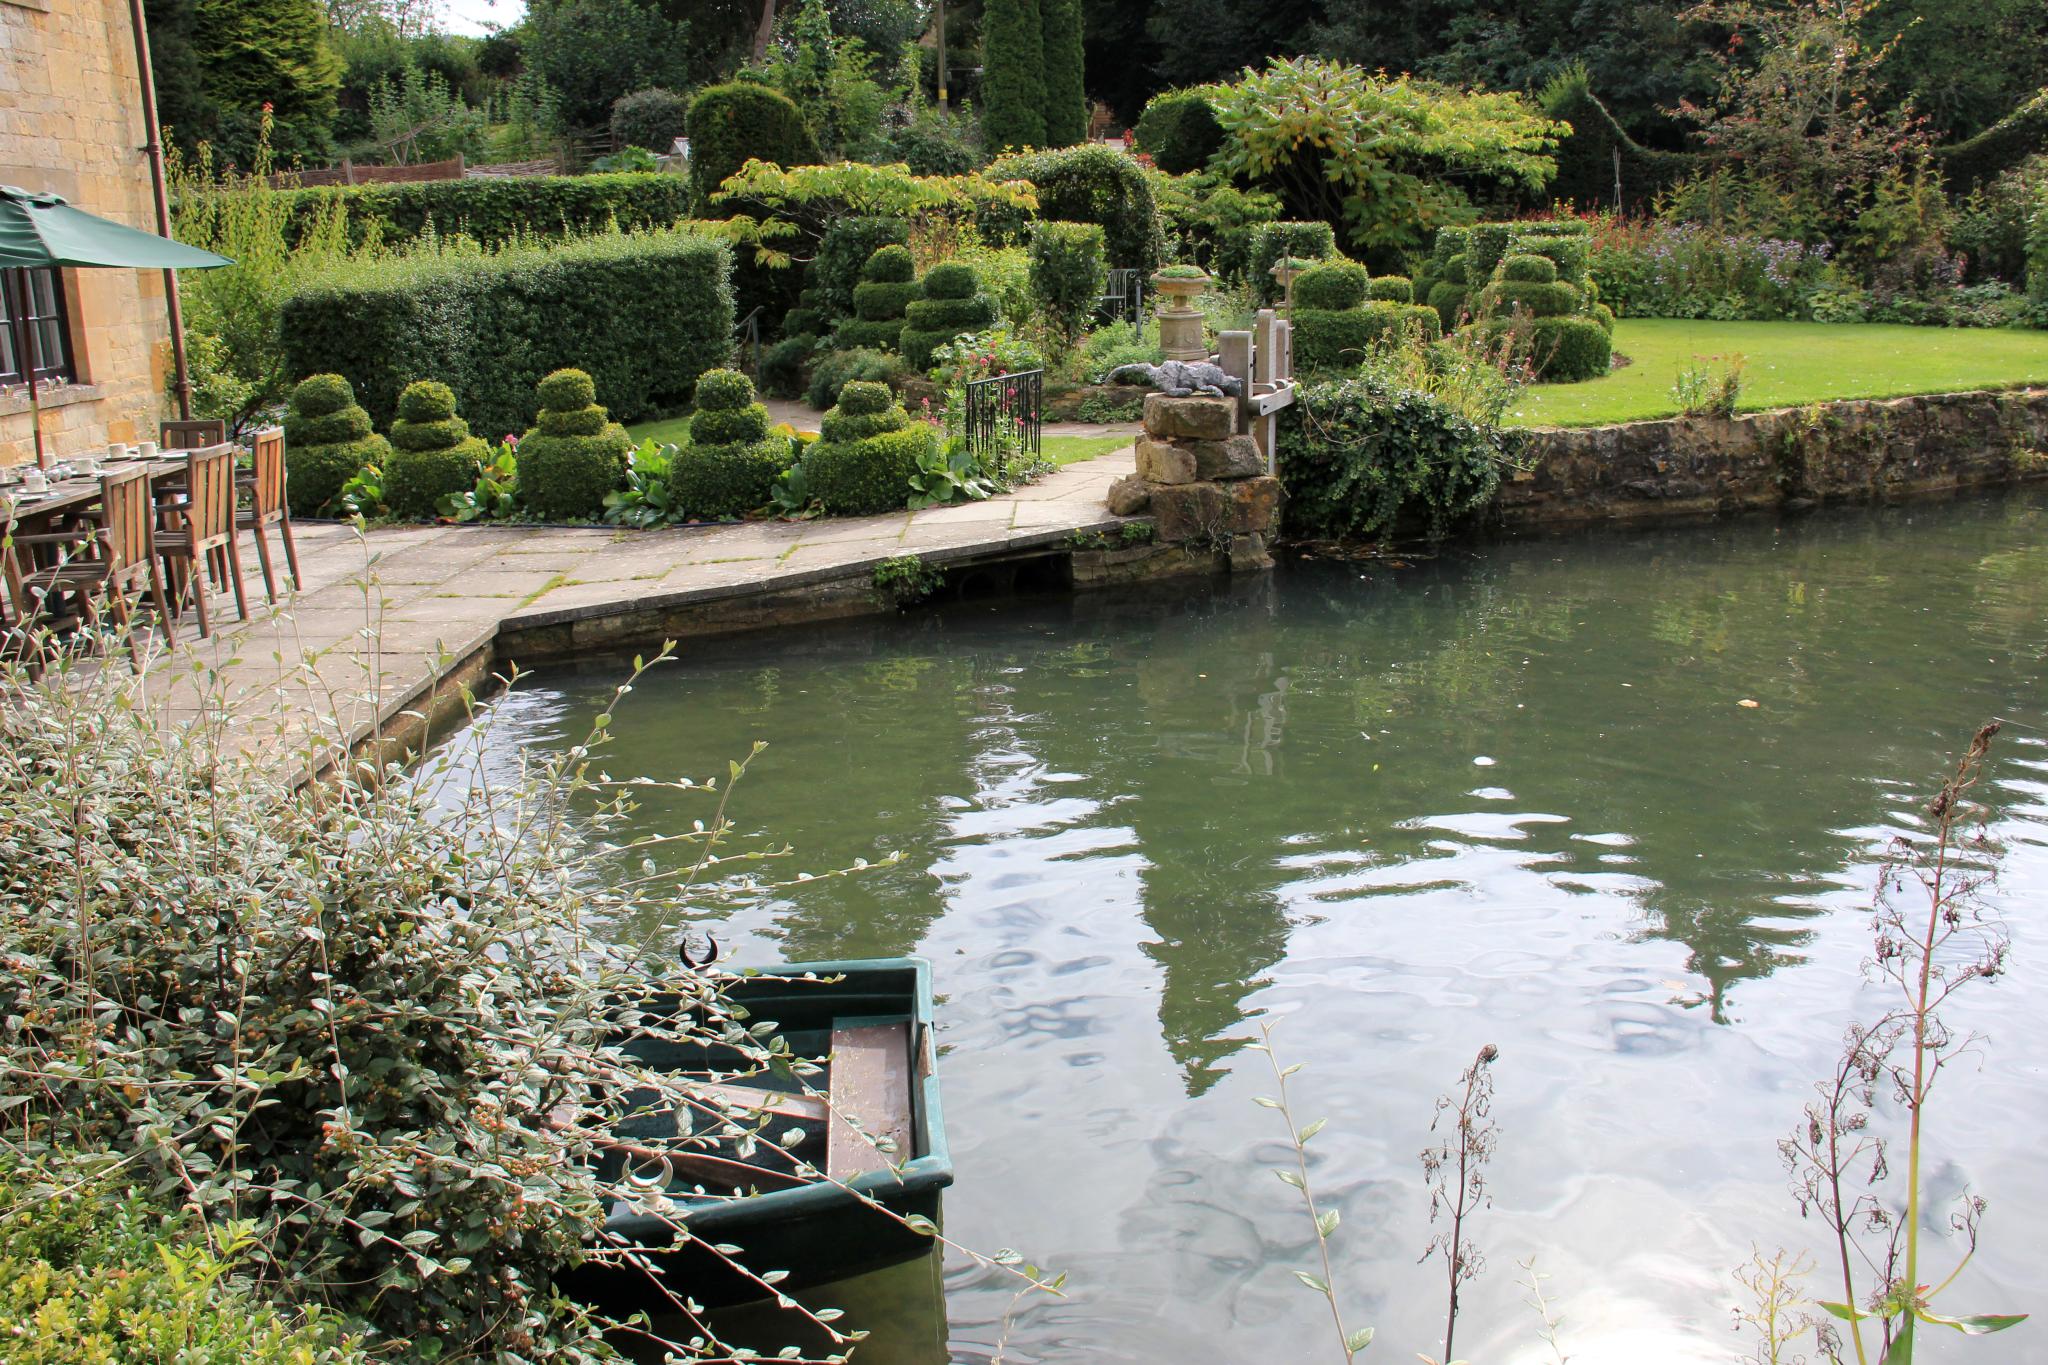 the pond in the garden is clear and sunny